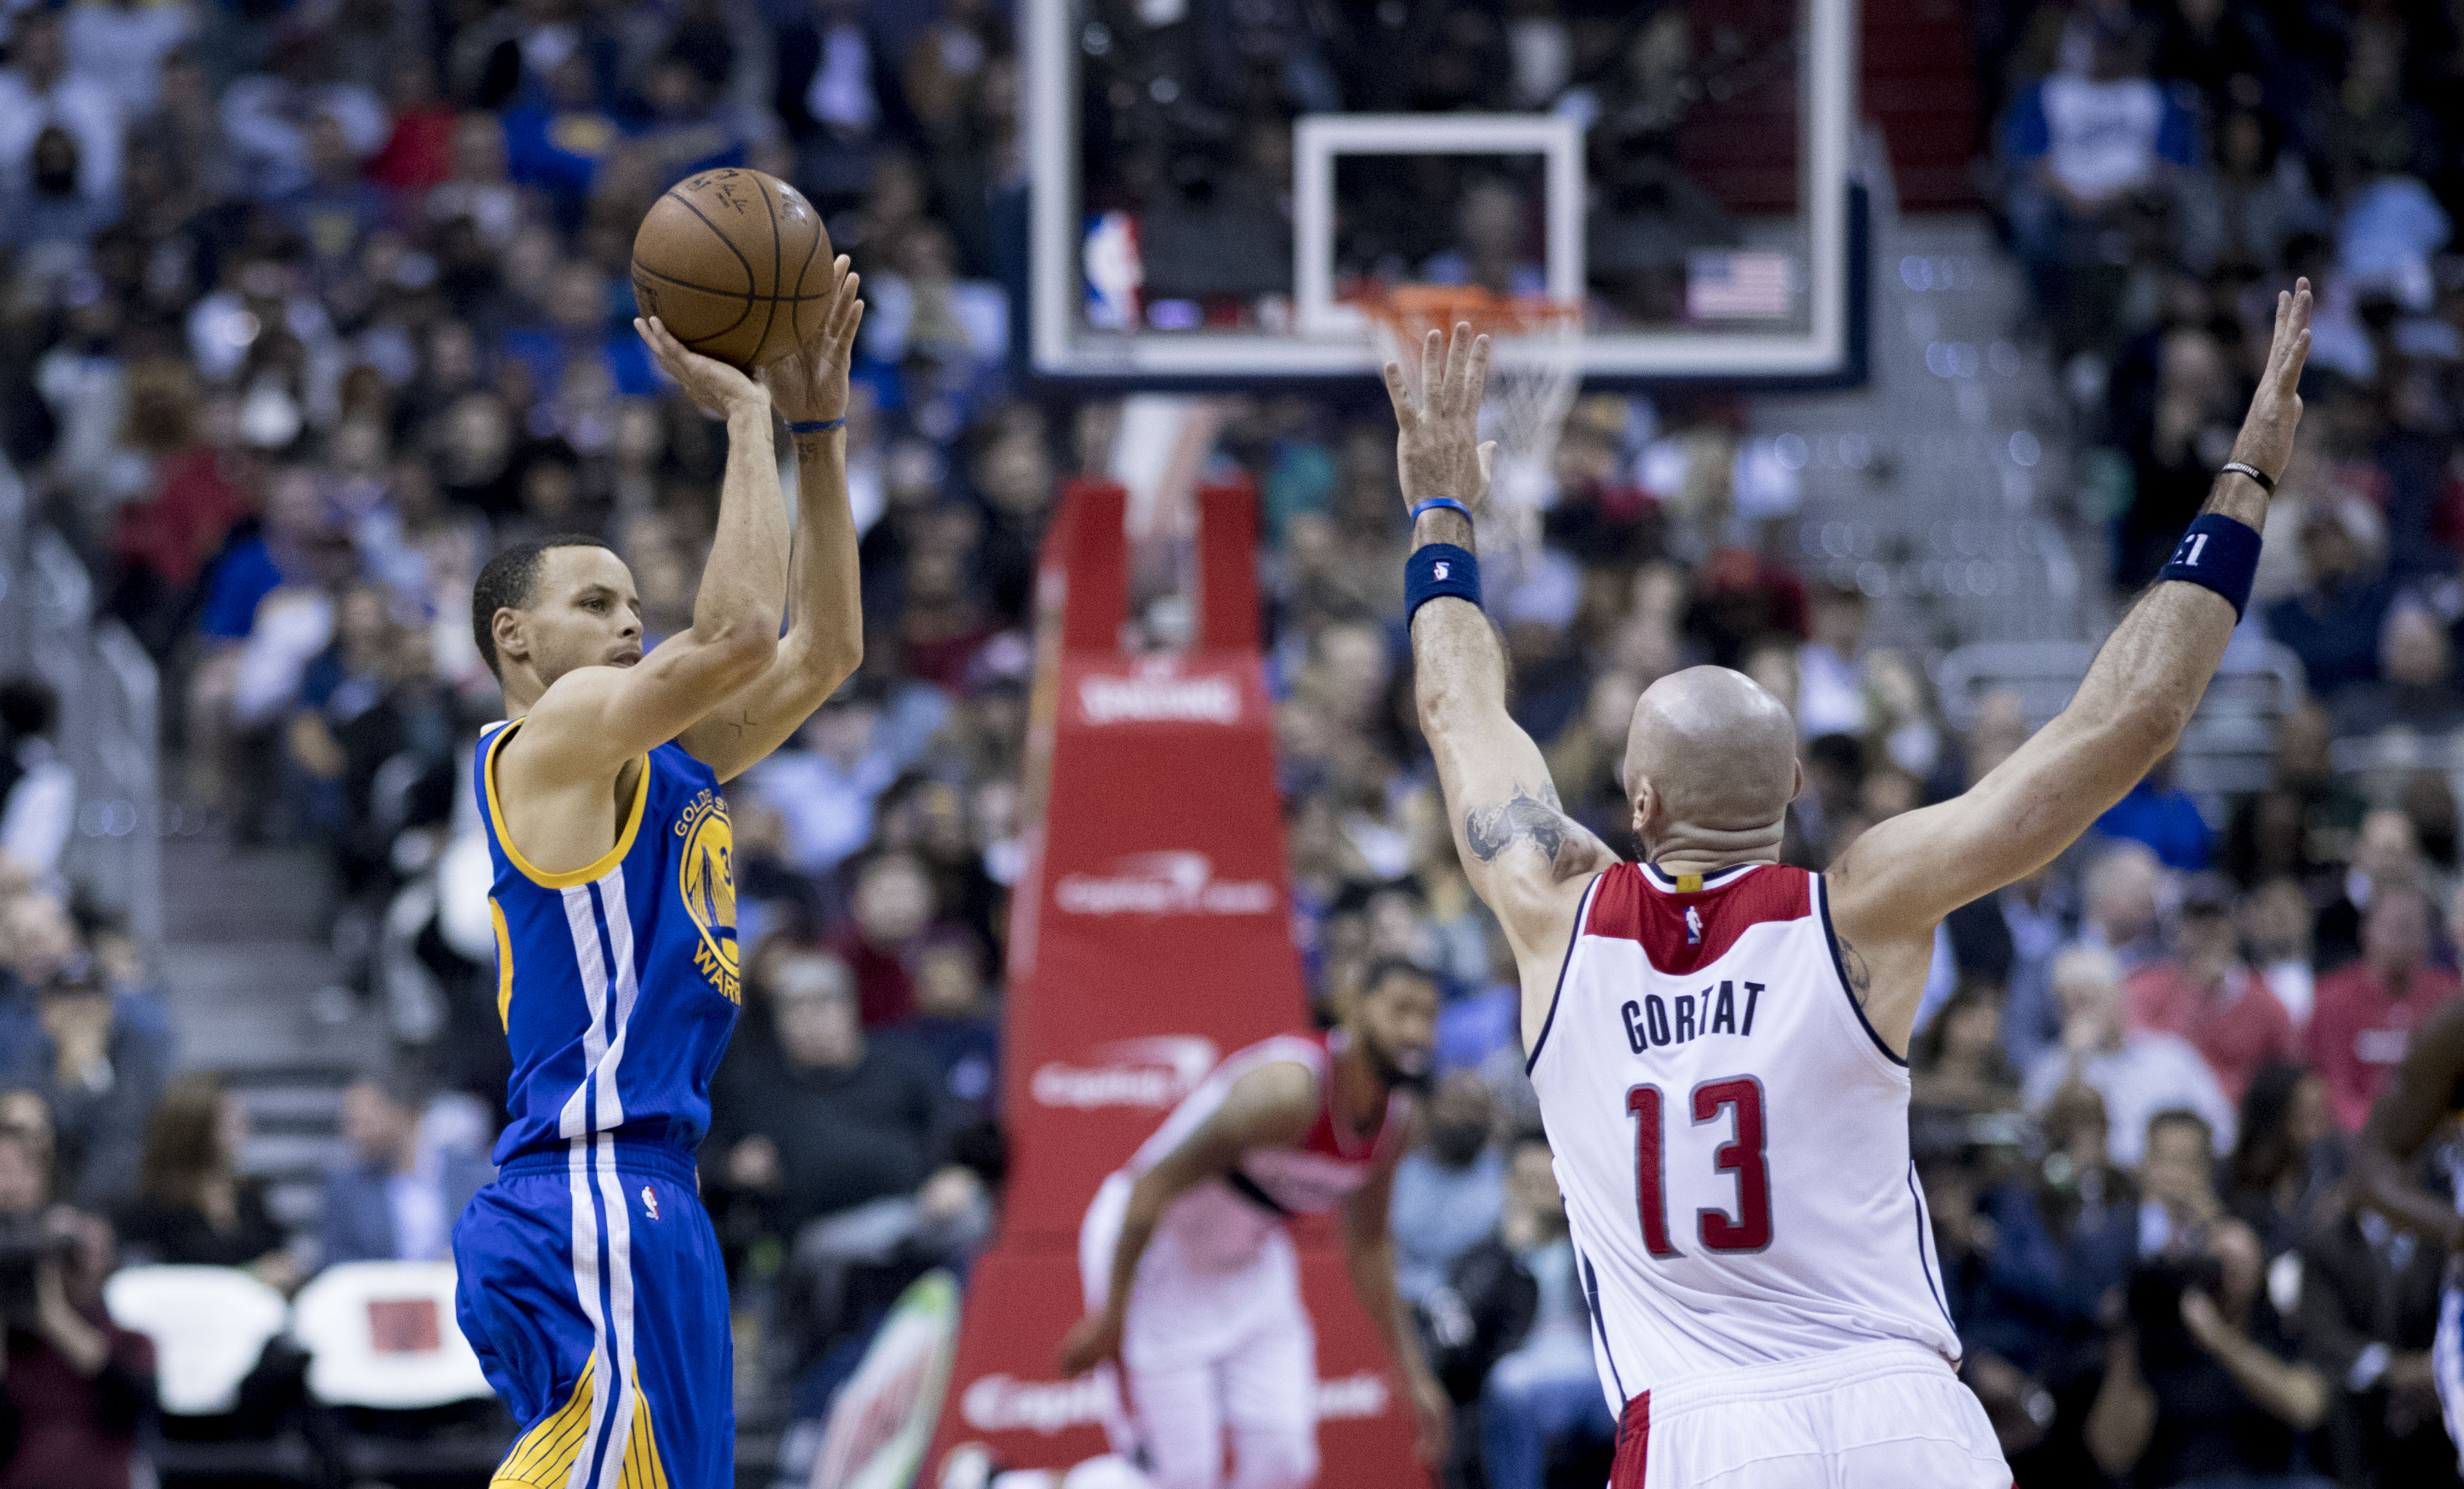 In the foreground there are two basketball players. Stephen Curry is on the left and jumping into the air with the basketball in his hands. Marcin Gortat is on the right, facing away from the camera and his arms are in the air as he runs towards Stephen.